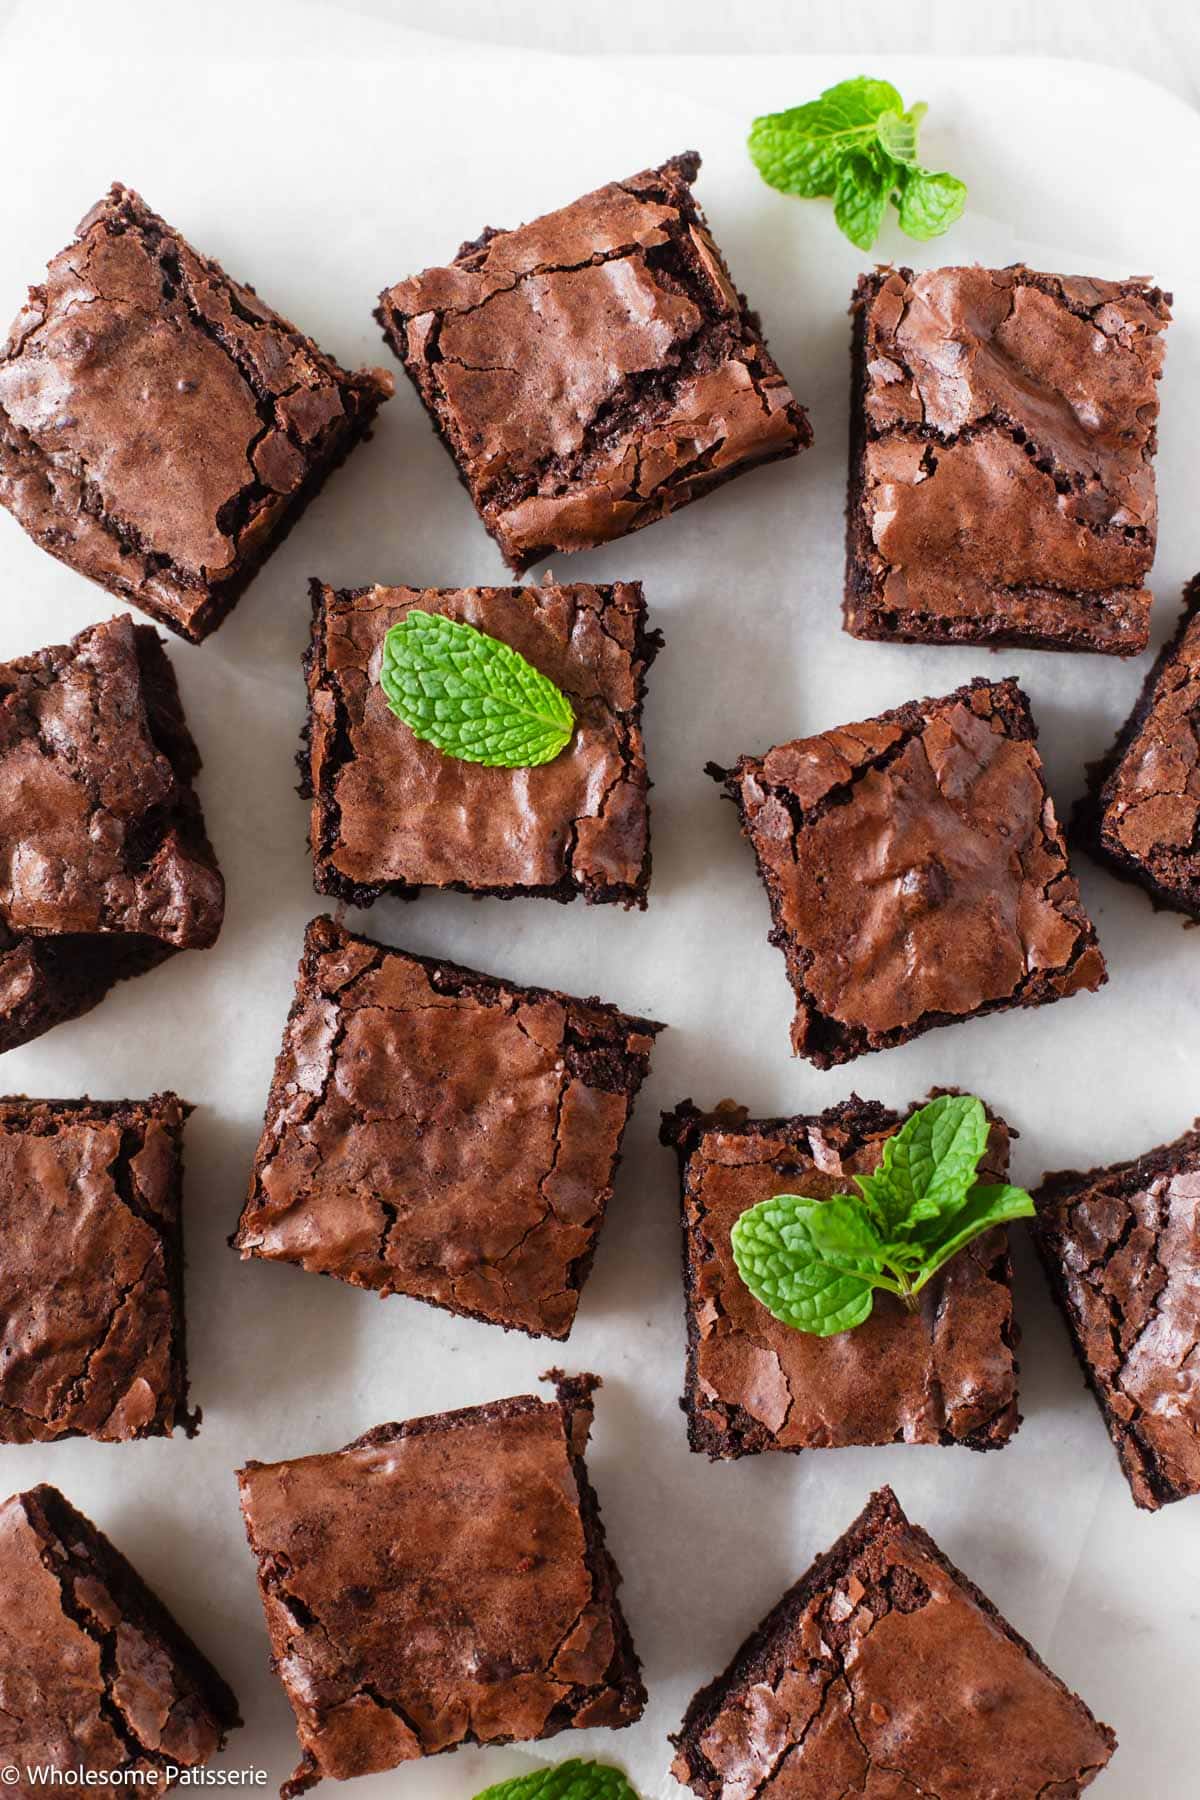 Box brownies cut into squares and served on marble platter with fresh mint leaves.